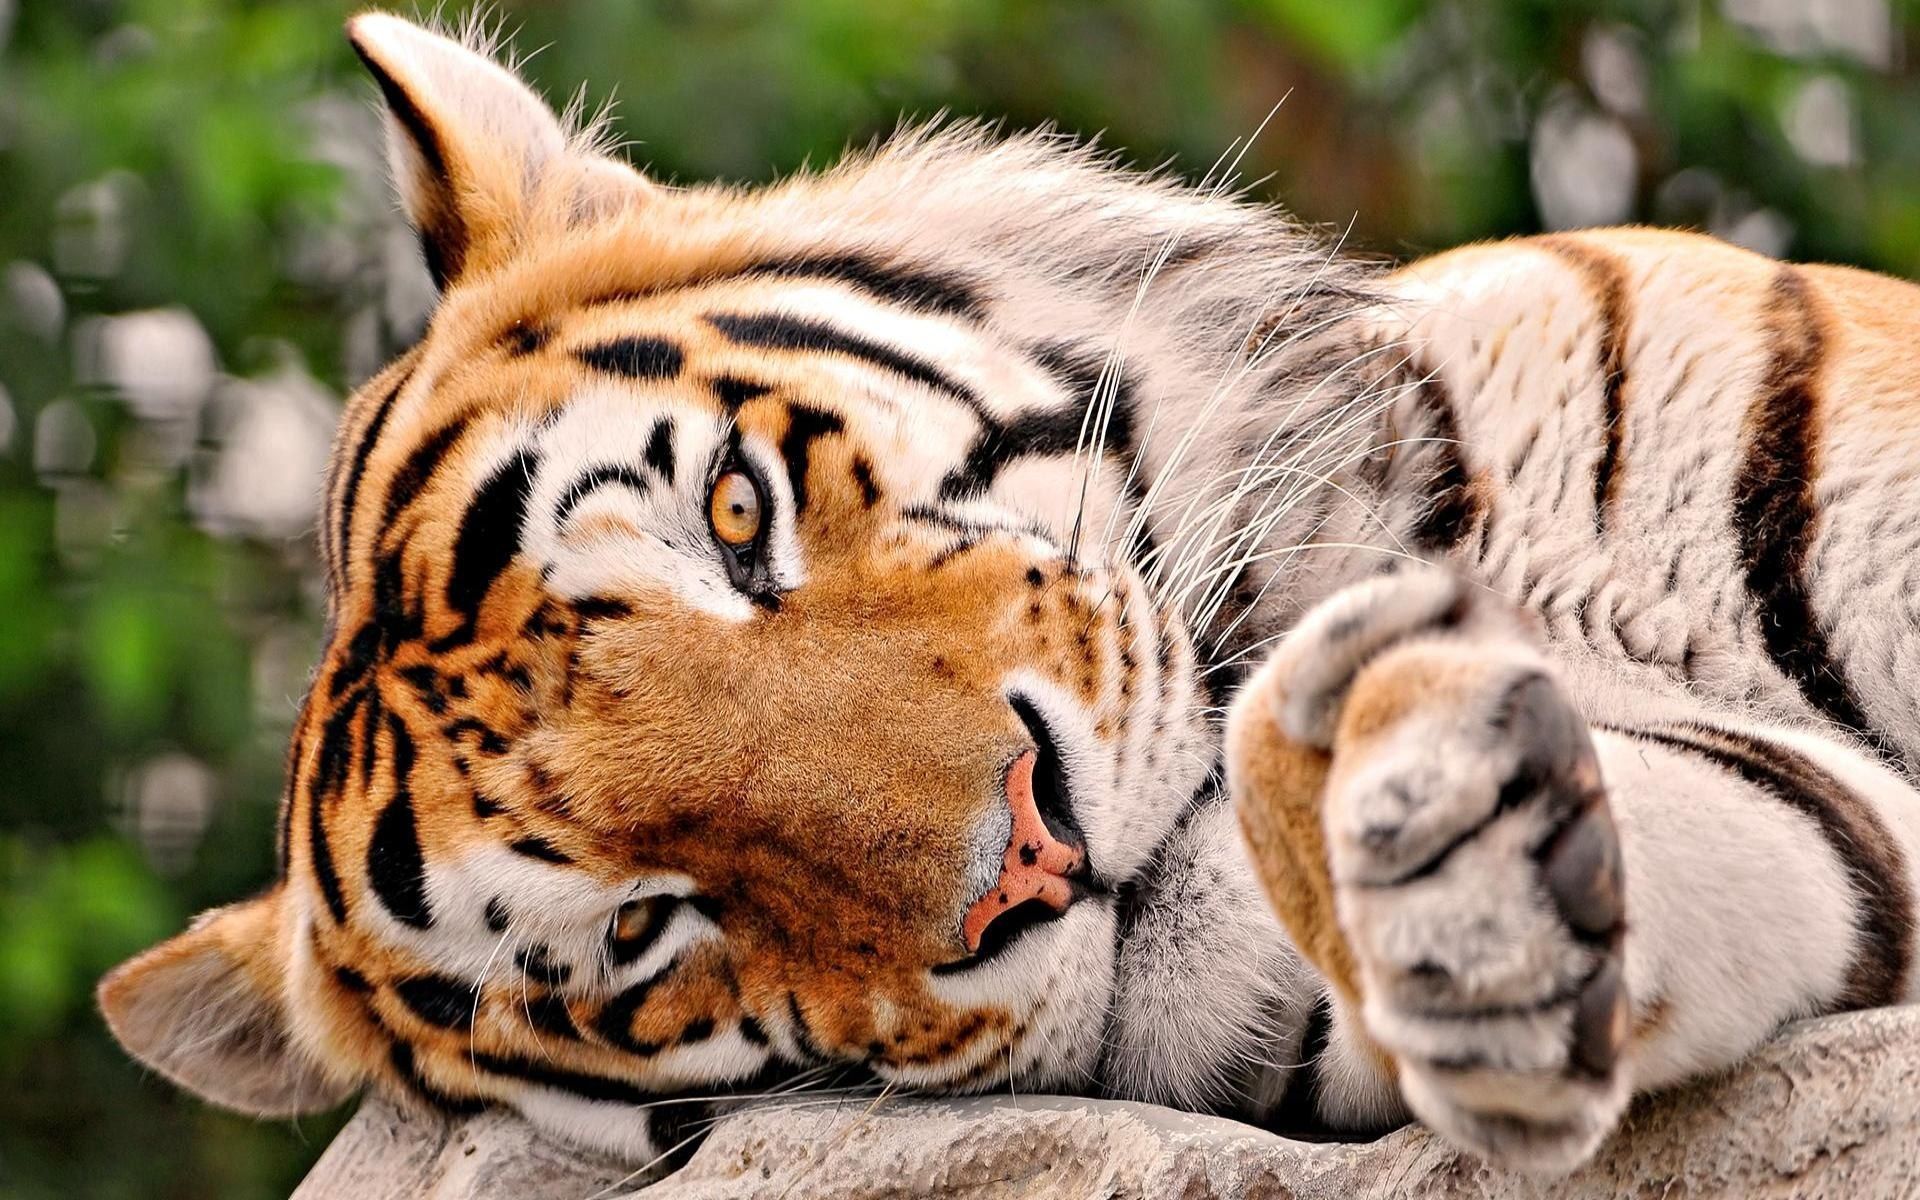 Tiger wallpaper 1920x1200 - (#25943) - High Quality and Resolution ...